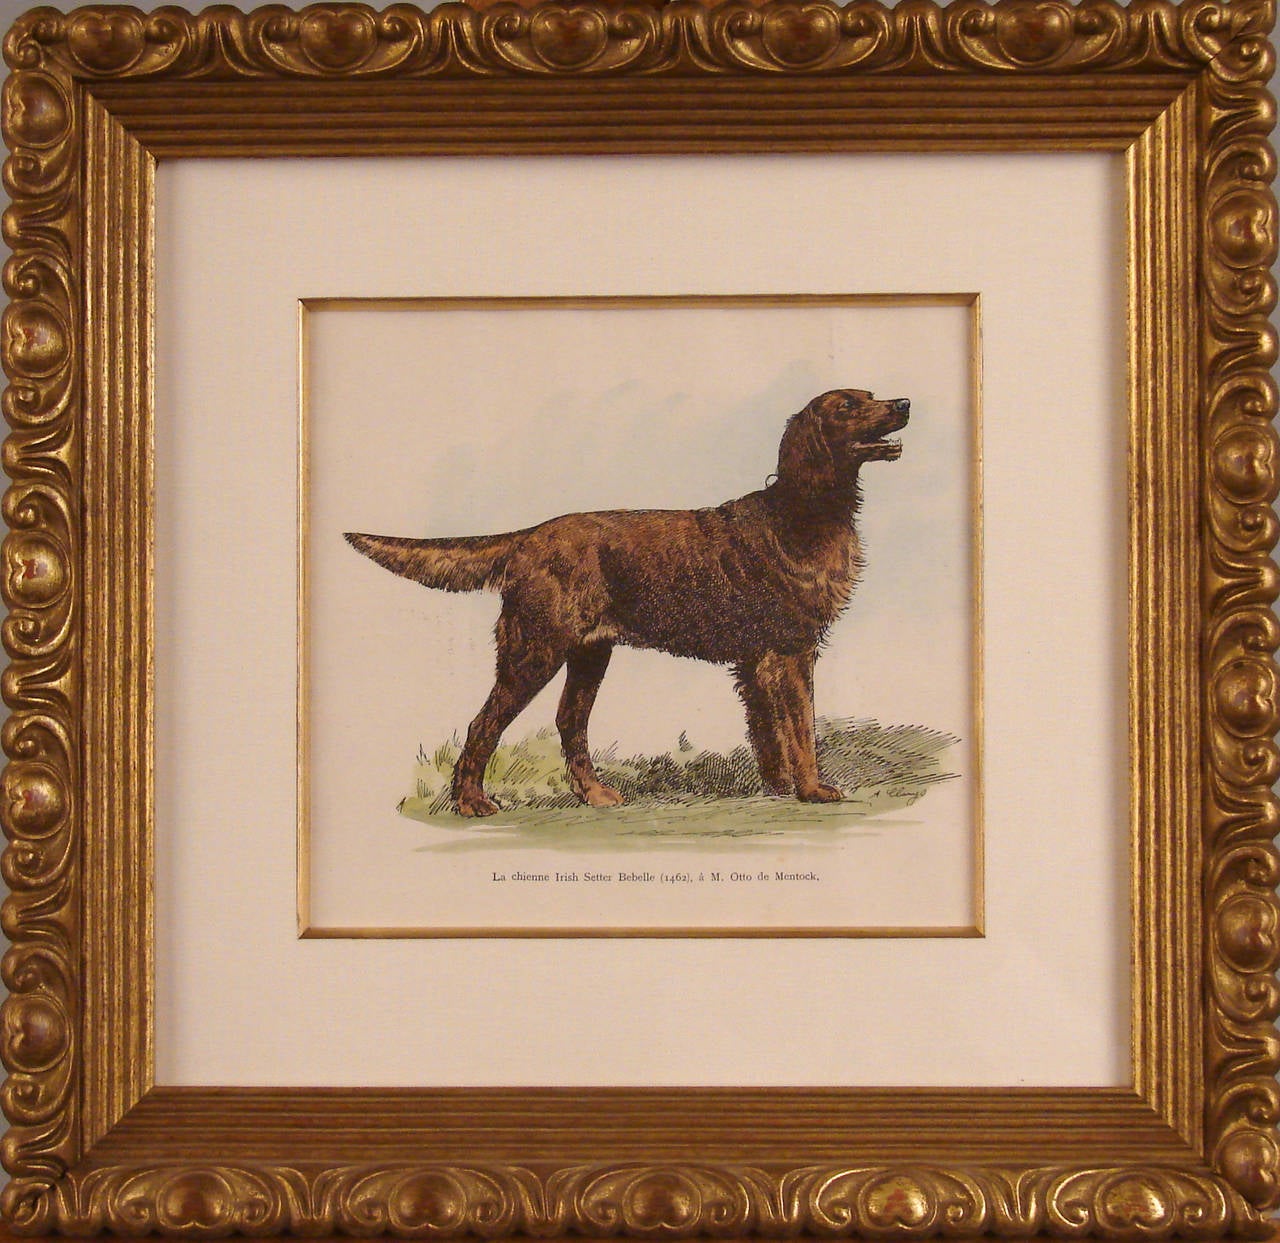 A pleasing group of six late 19th century French colored engravings depicting the following breeds of dogs: Bloodhound, Irish setter, English bulldog, St. Bernard, Bedlington terrier and a Fox terrier. Various artists and dates. Very well framed and